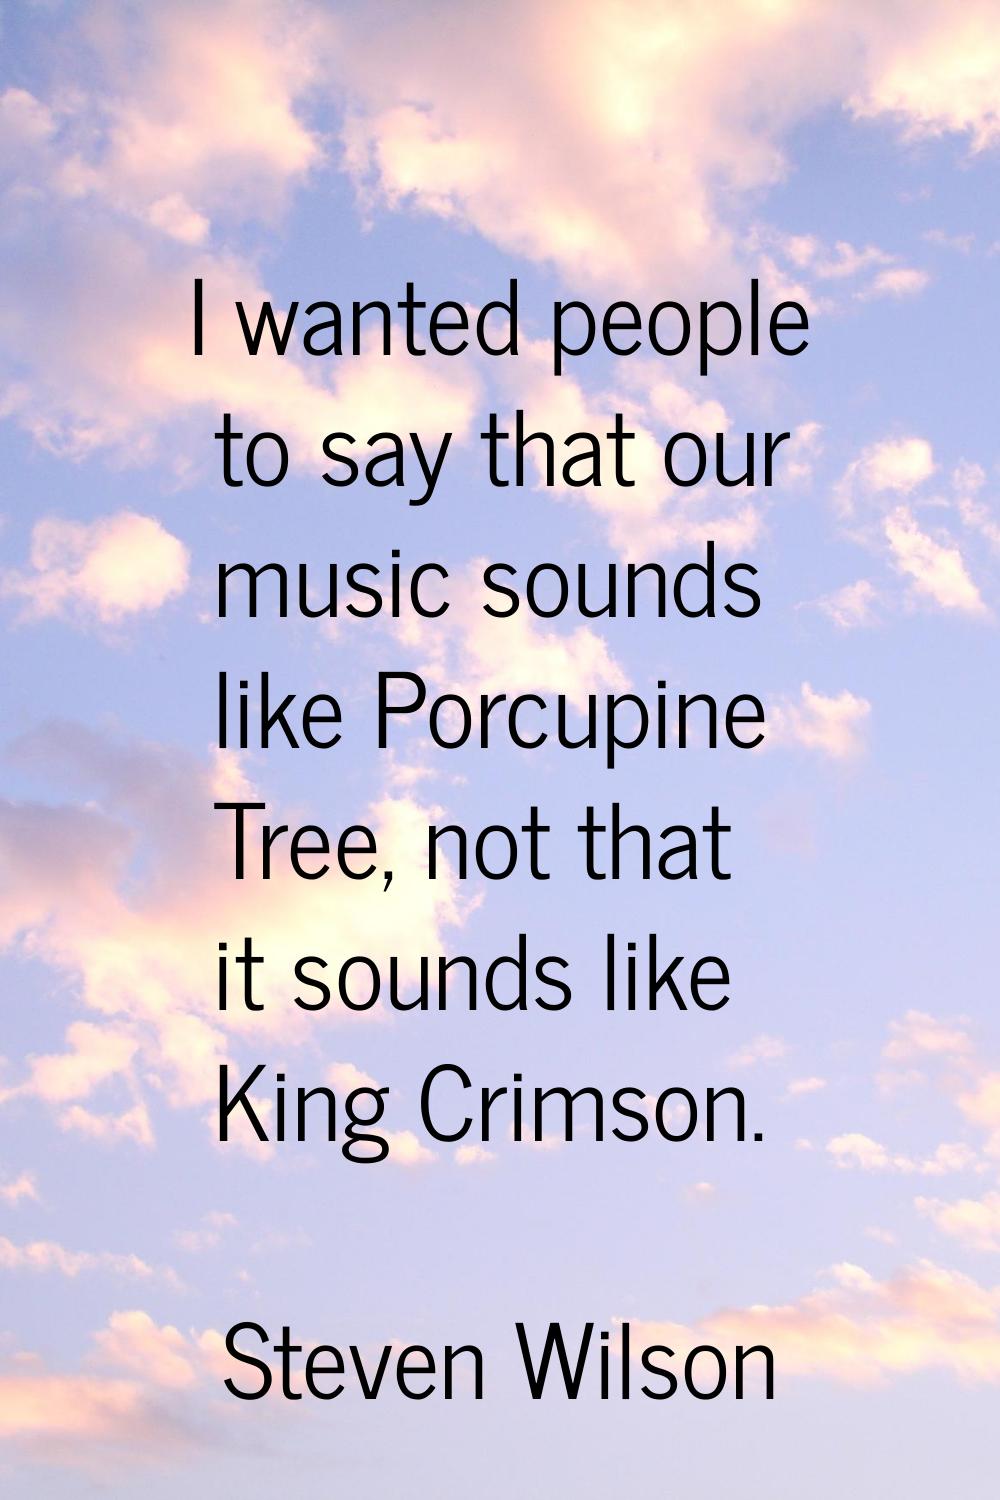 I wanted people to say that our music sounds like Porcupine Tree, not that it sounds like King Crim